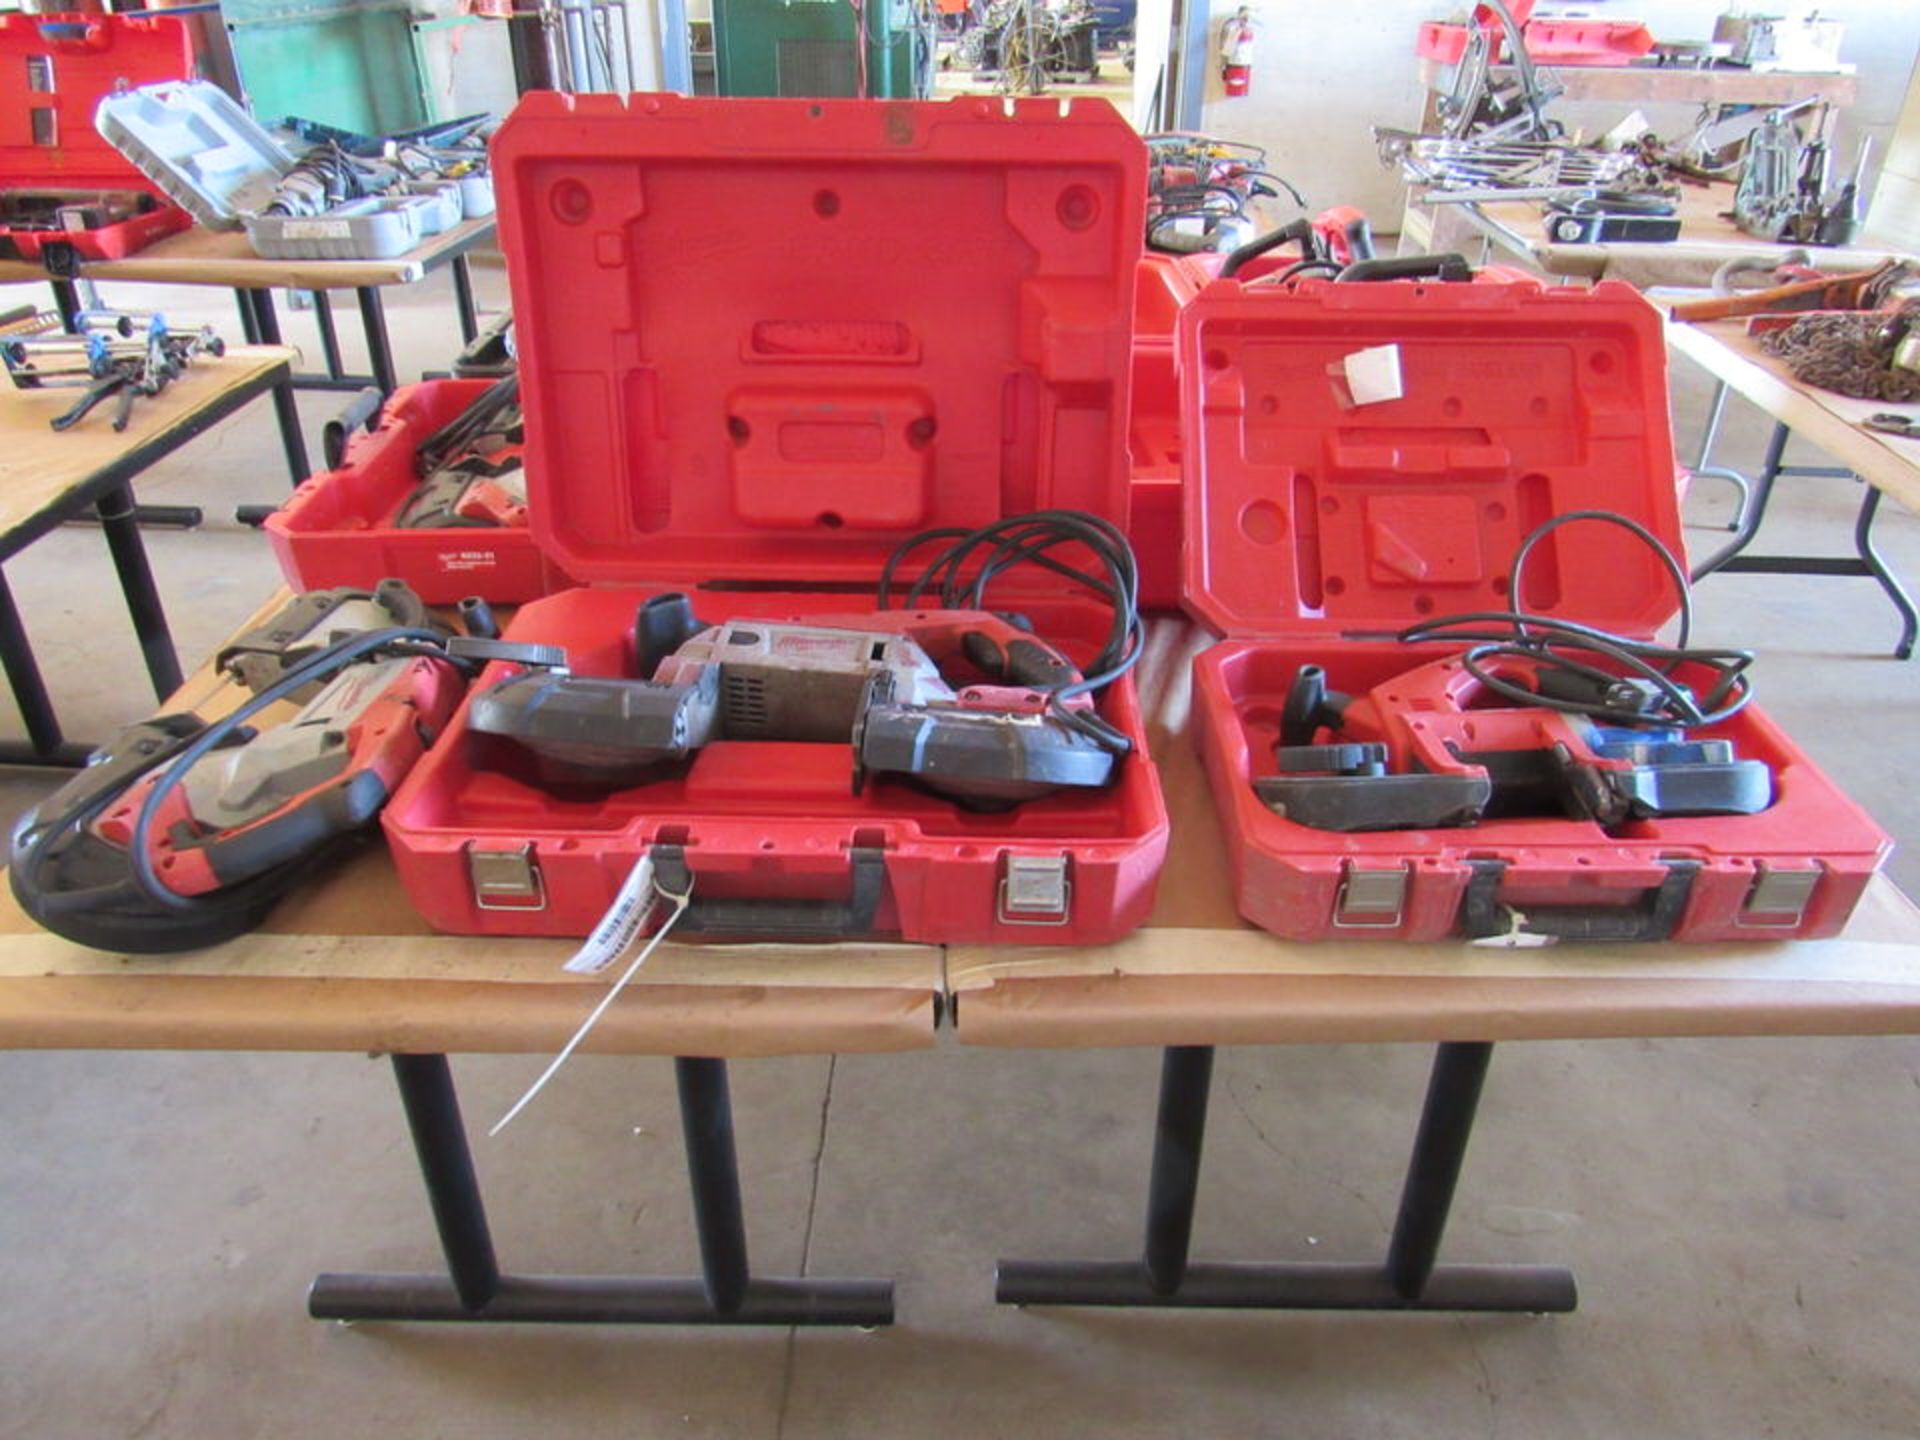 Three Milwaukee Portable Metal Cutting Bandsaws, 2 in Cases